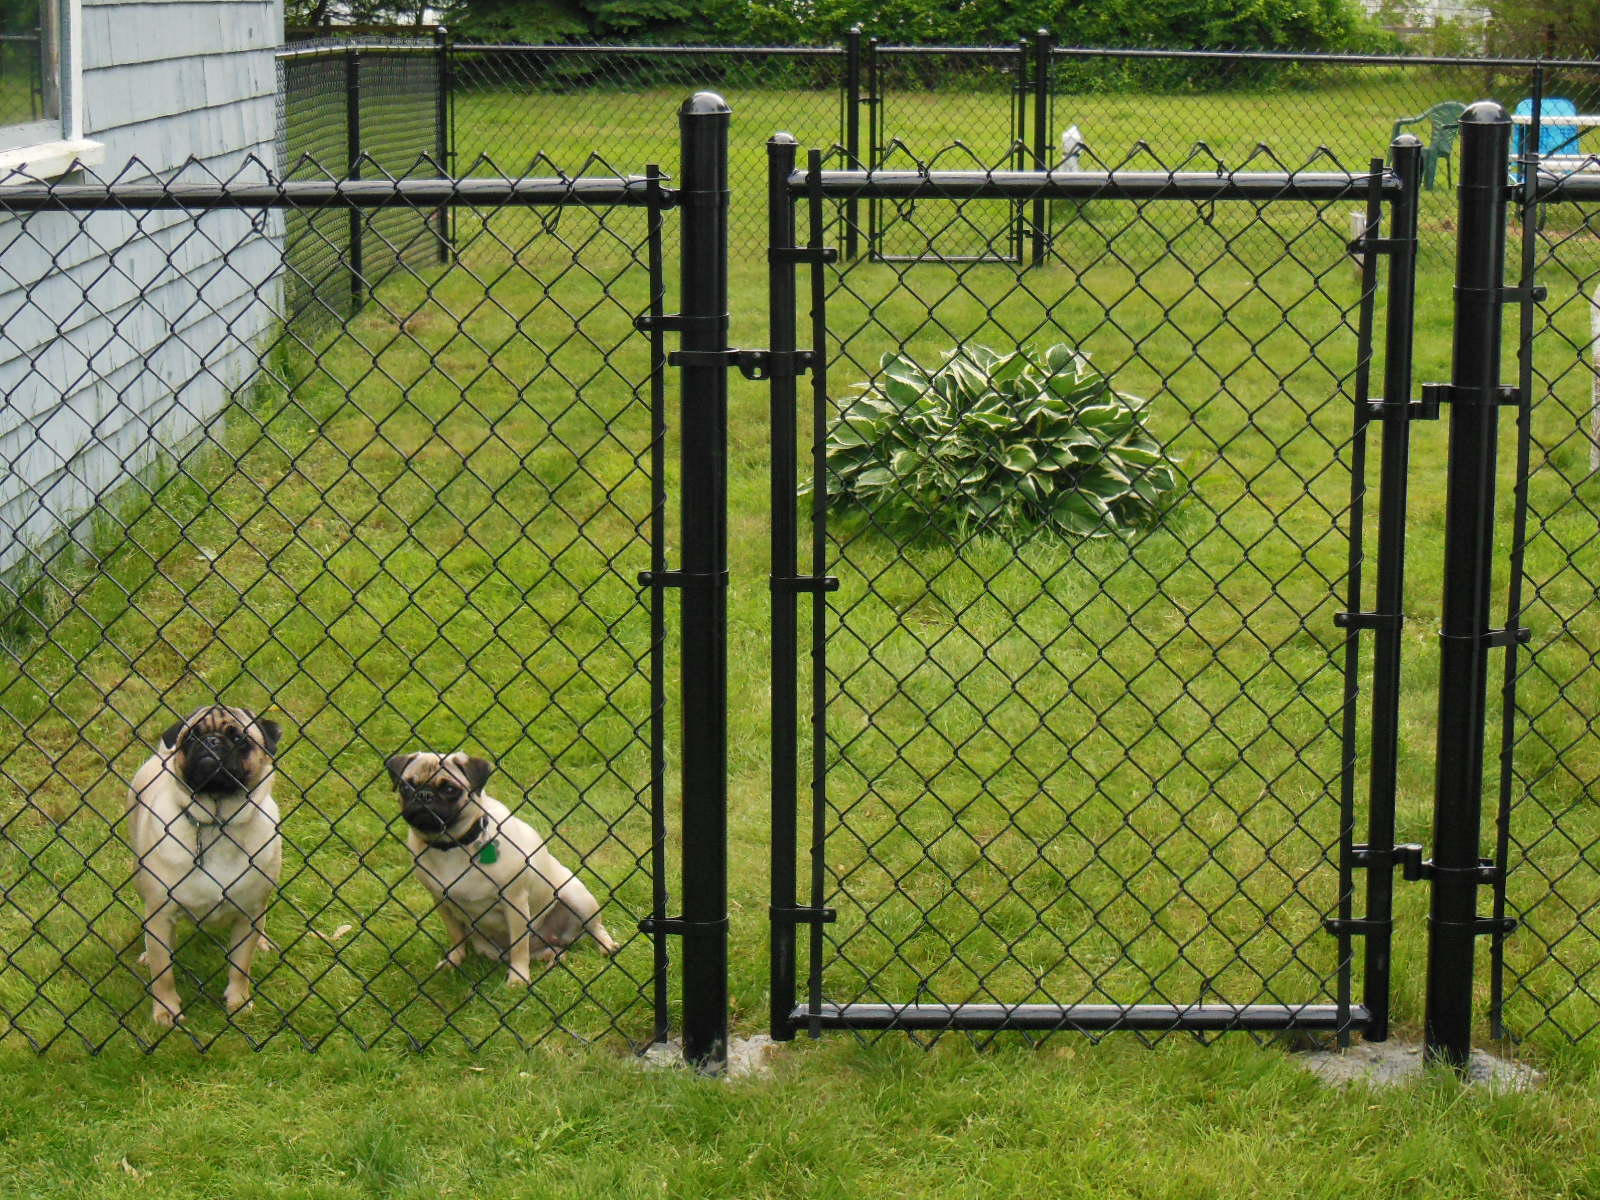 New Dog Fences For Outside Design Idea And Decorations Above pertaining to sizing 1600 X 1200